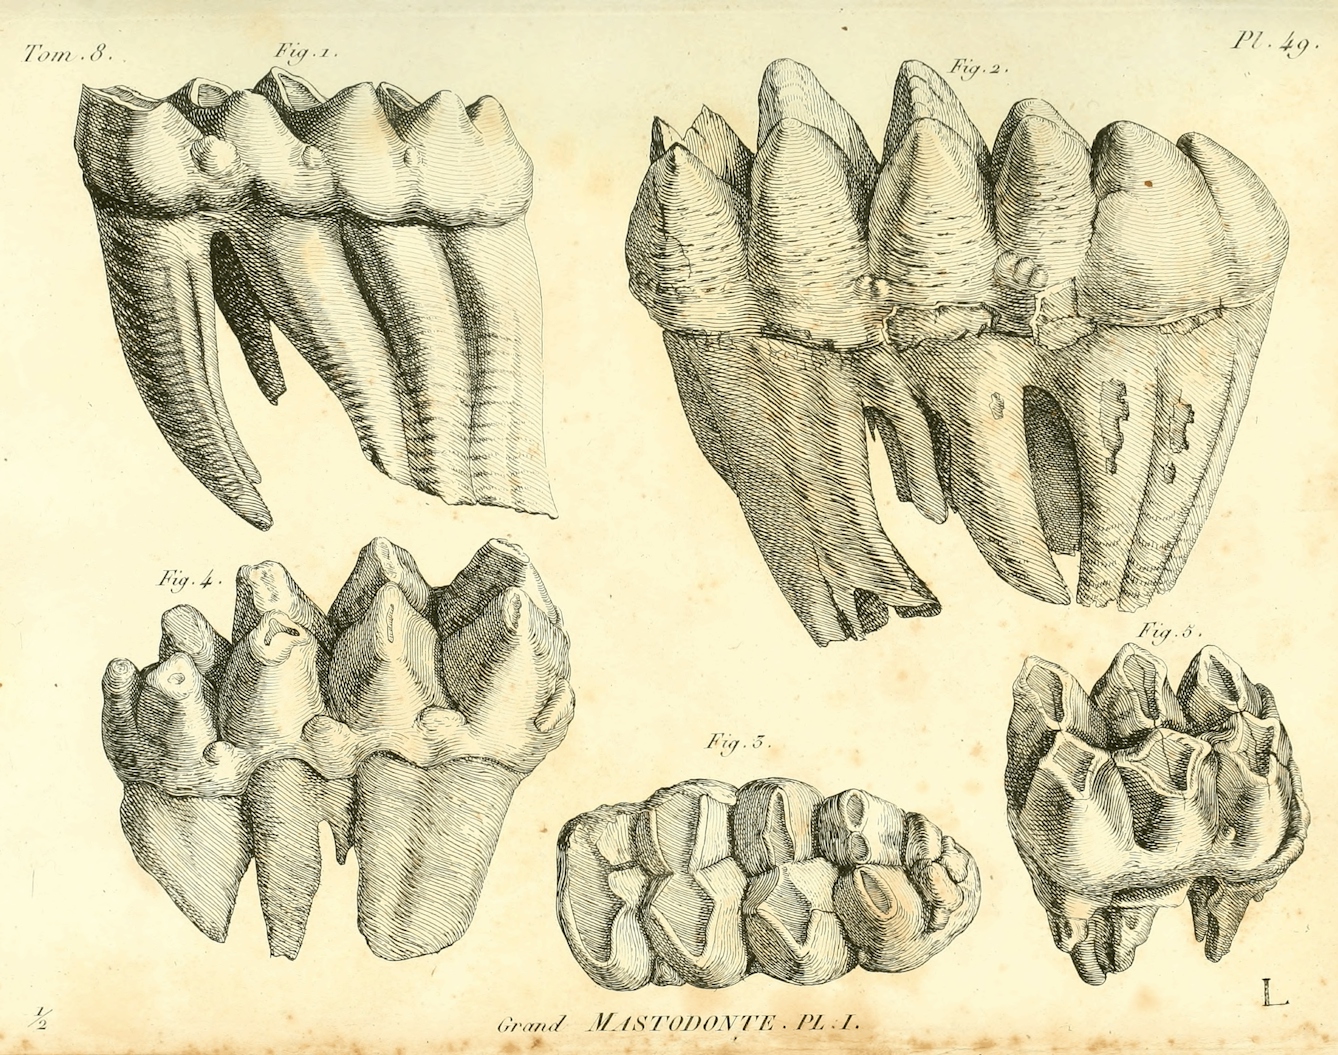 Black and white etchings of mastodon teeth from 1806 publication.